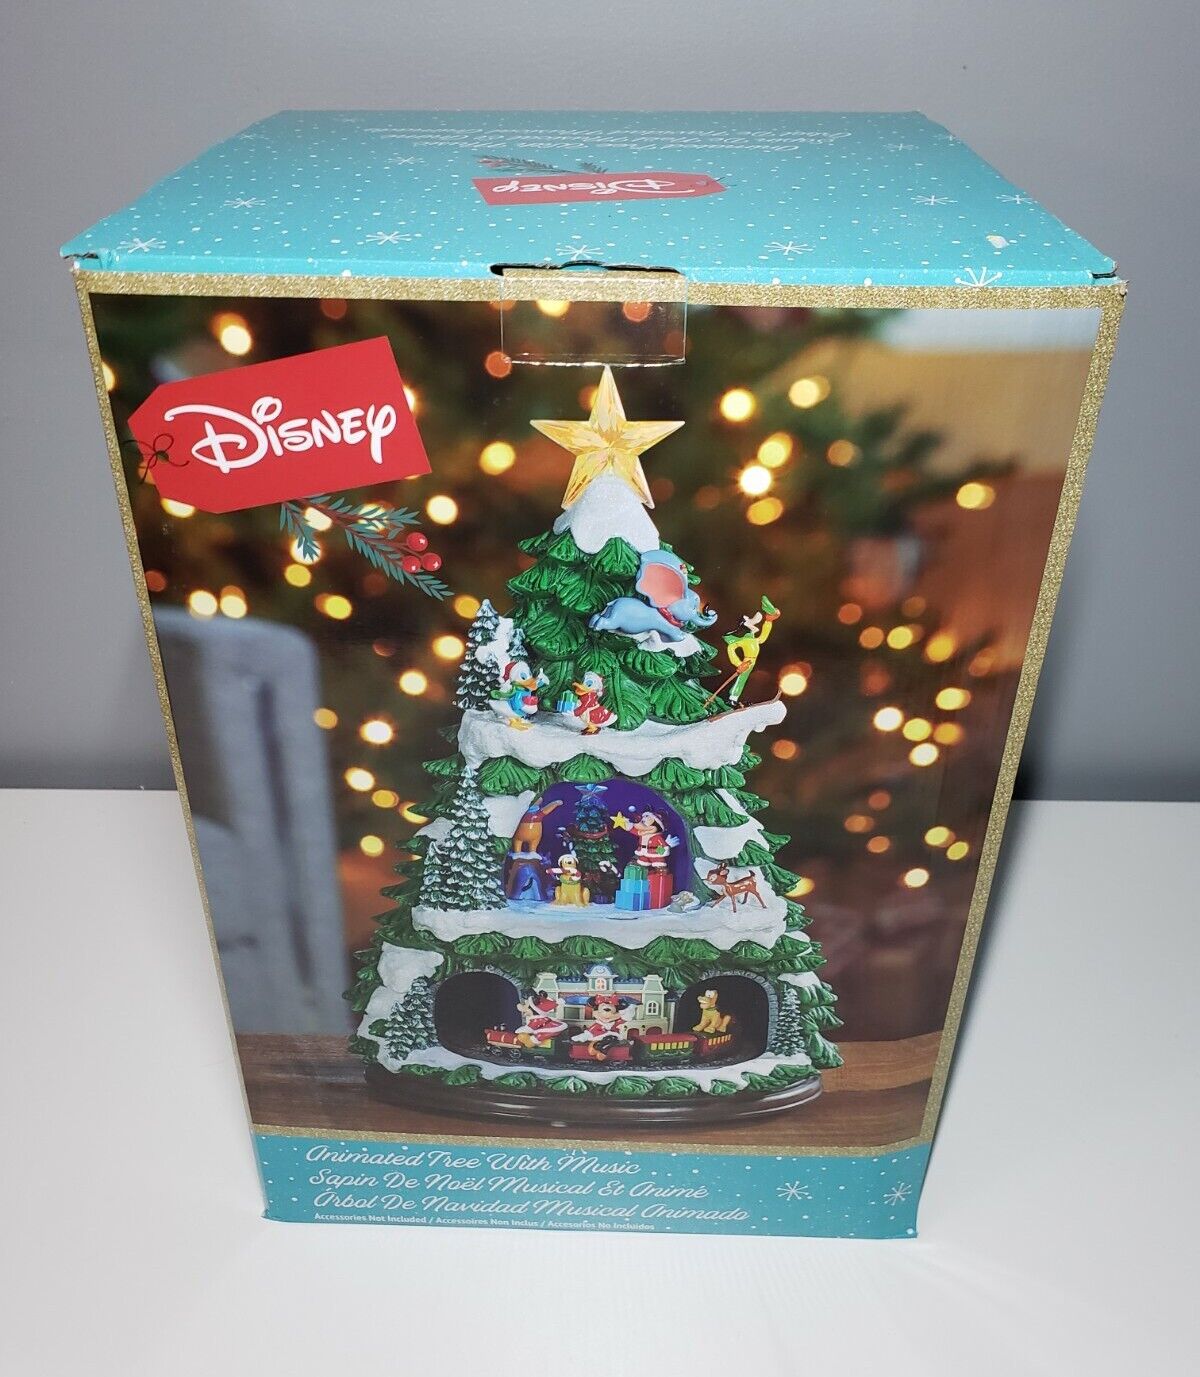 Disney Animated Christmas Tree with Music LED Lights, 8 Classic Holiday Songs